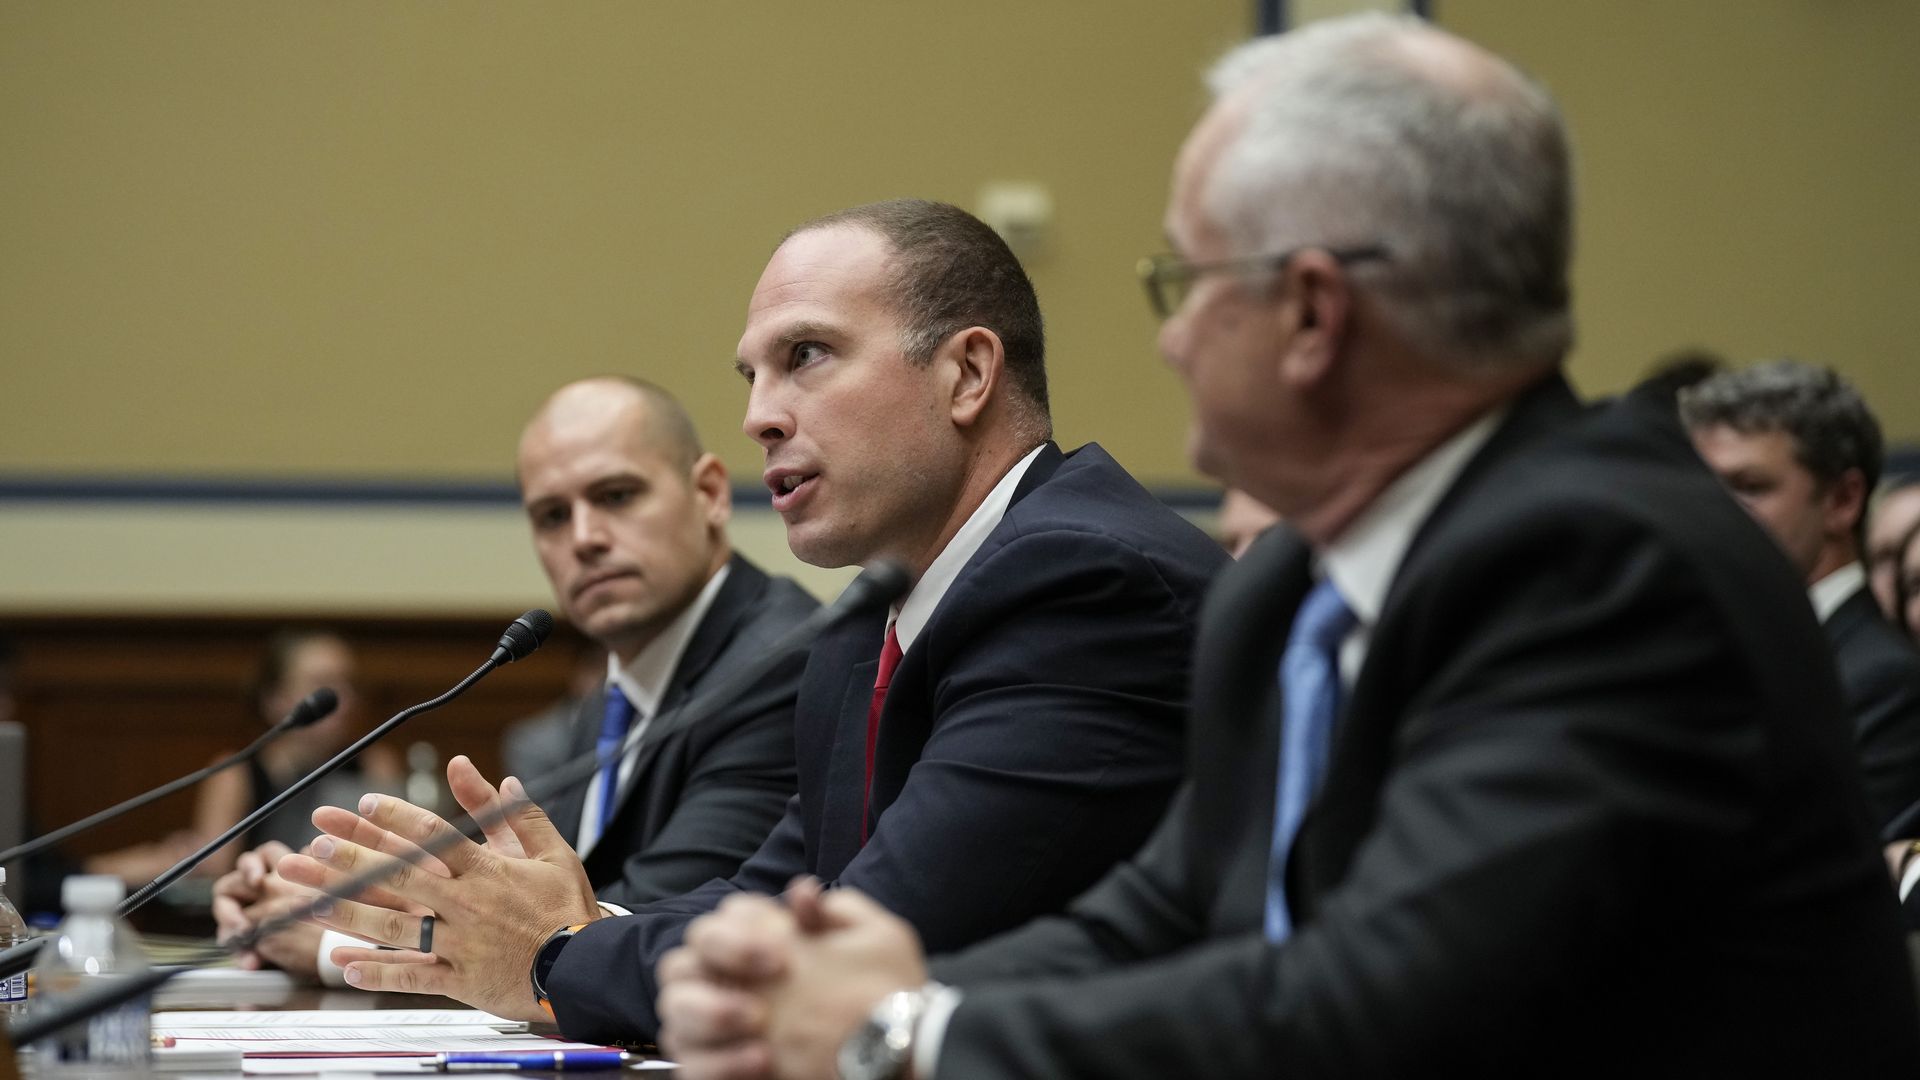 Three men at a Congressional hearing. The one in the middle is speaking